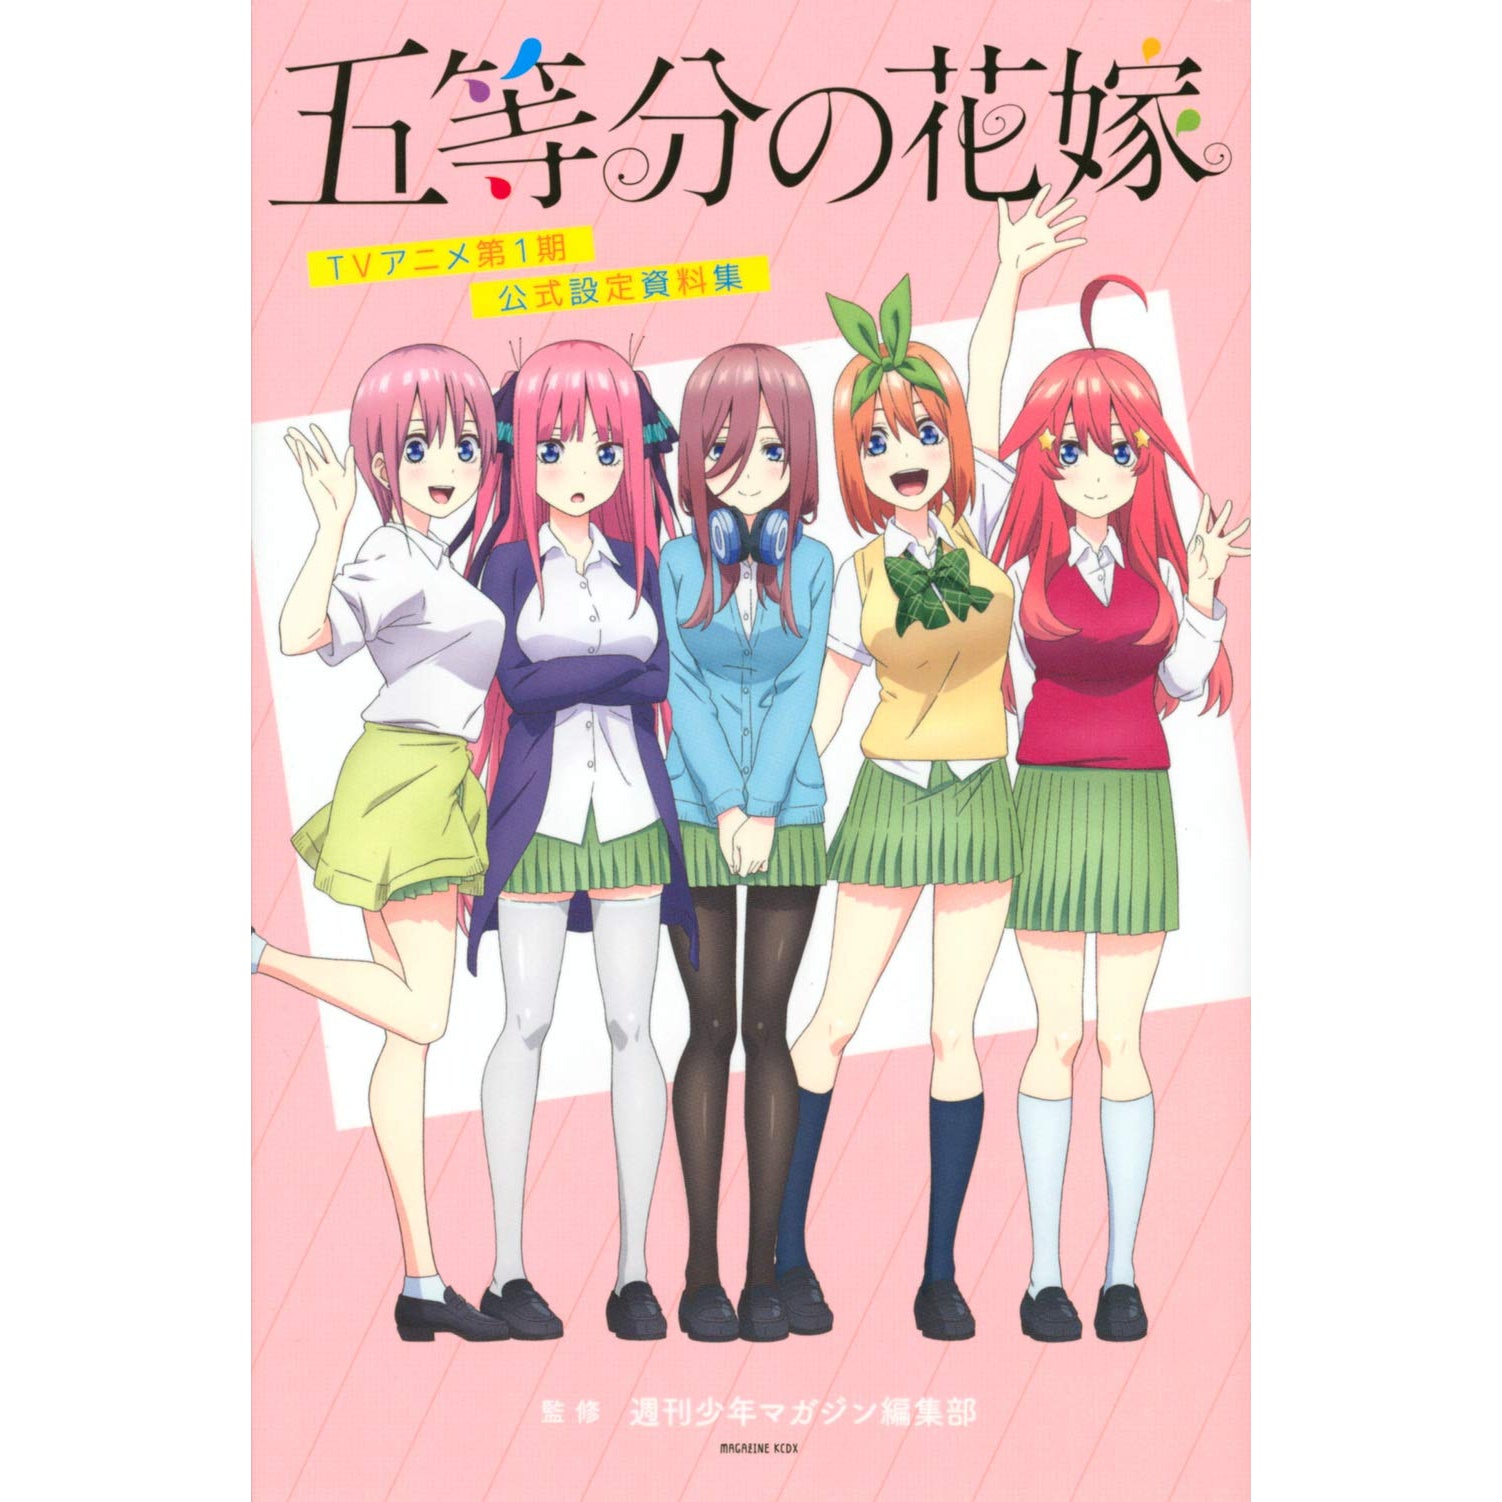 Anime Like The Quintessential Quintuplets